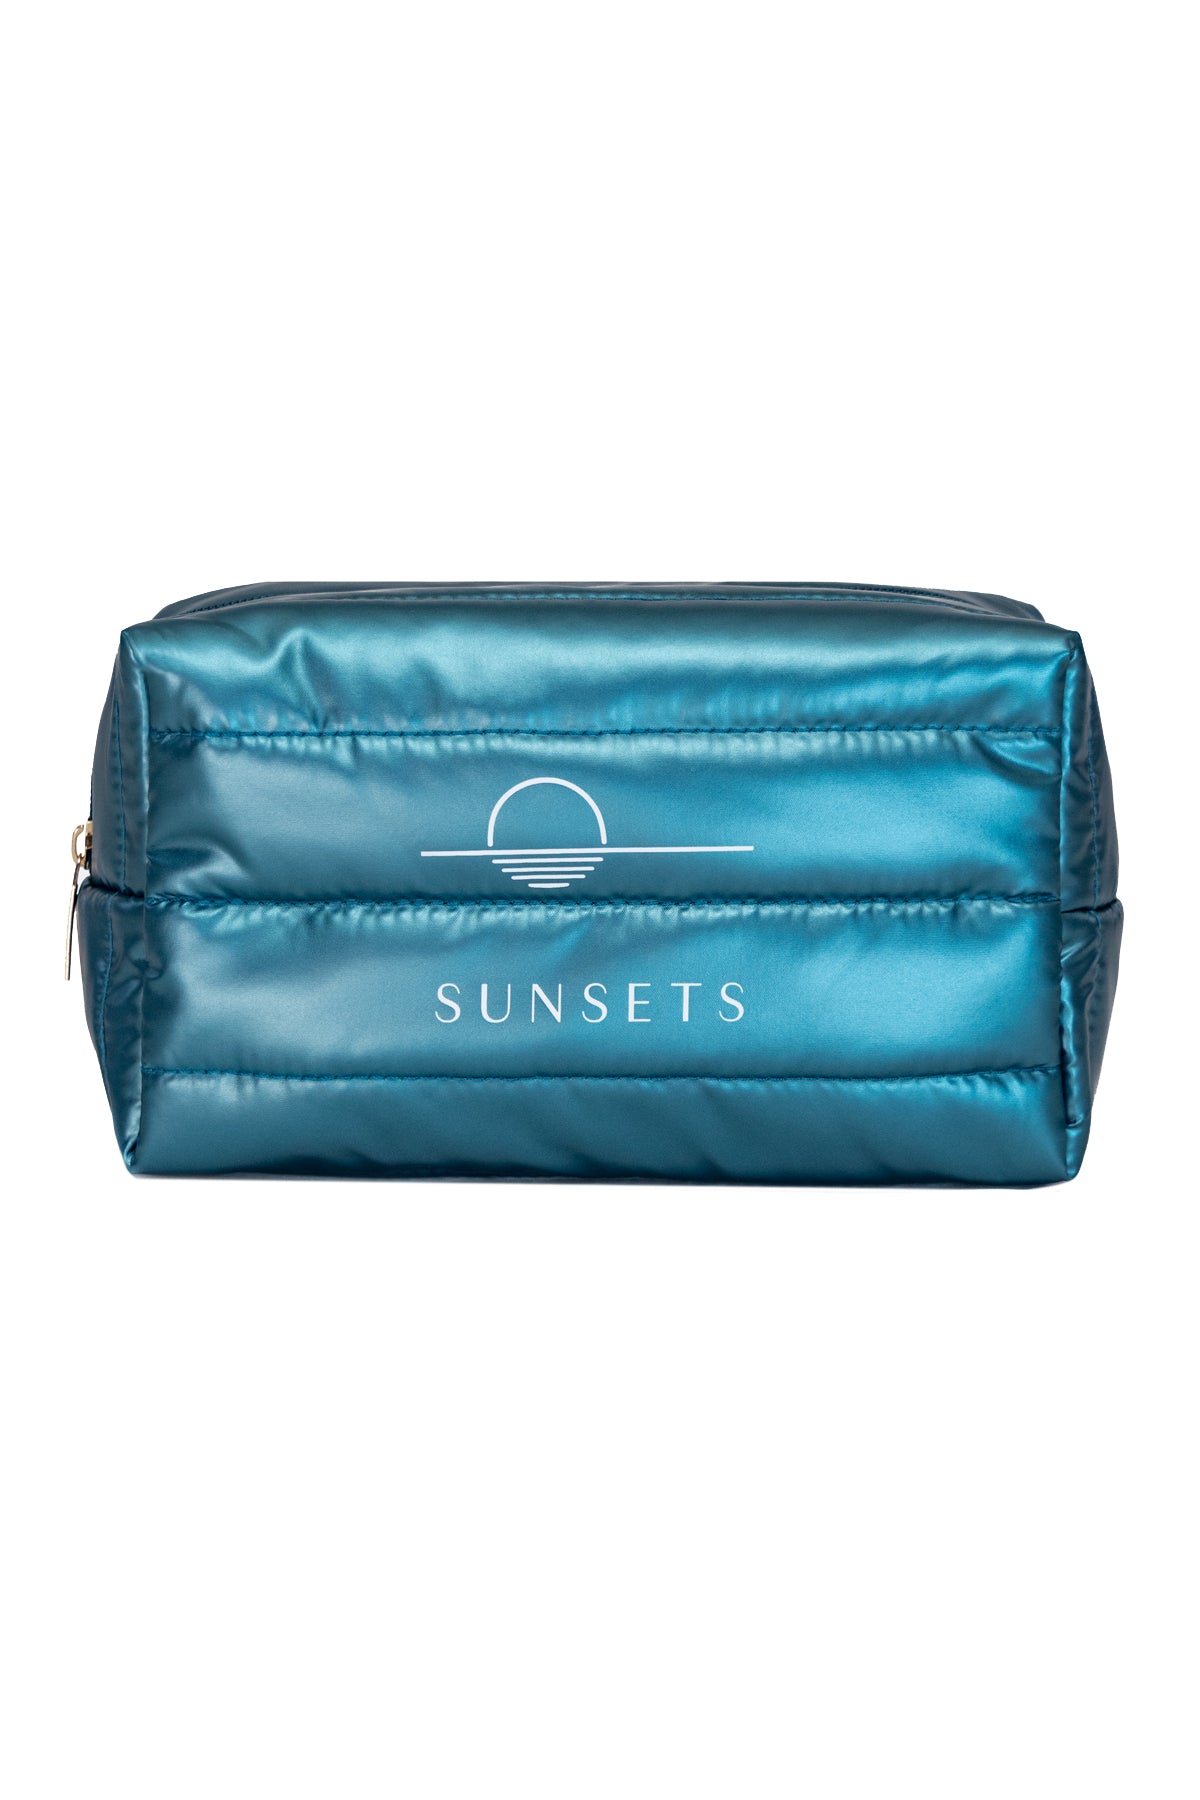 FREE Sunsets Travel Bag with $250 Purchase